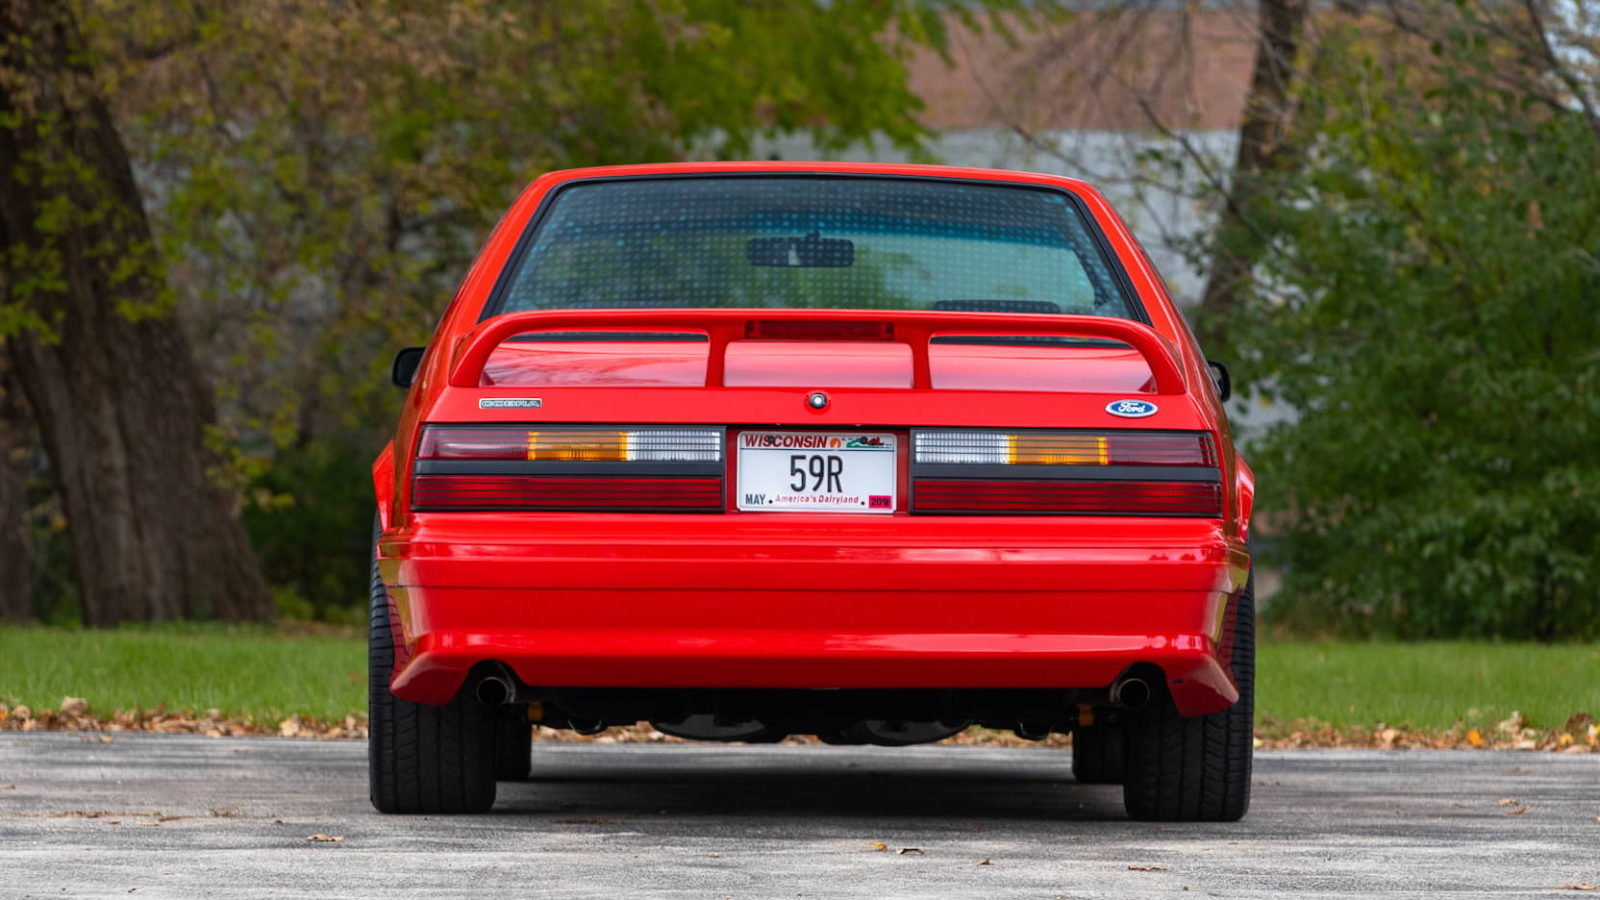 1993 SVT Mustang Cobra R - The Ultimate Version Of The Fox Body.